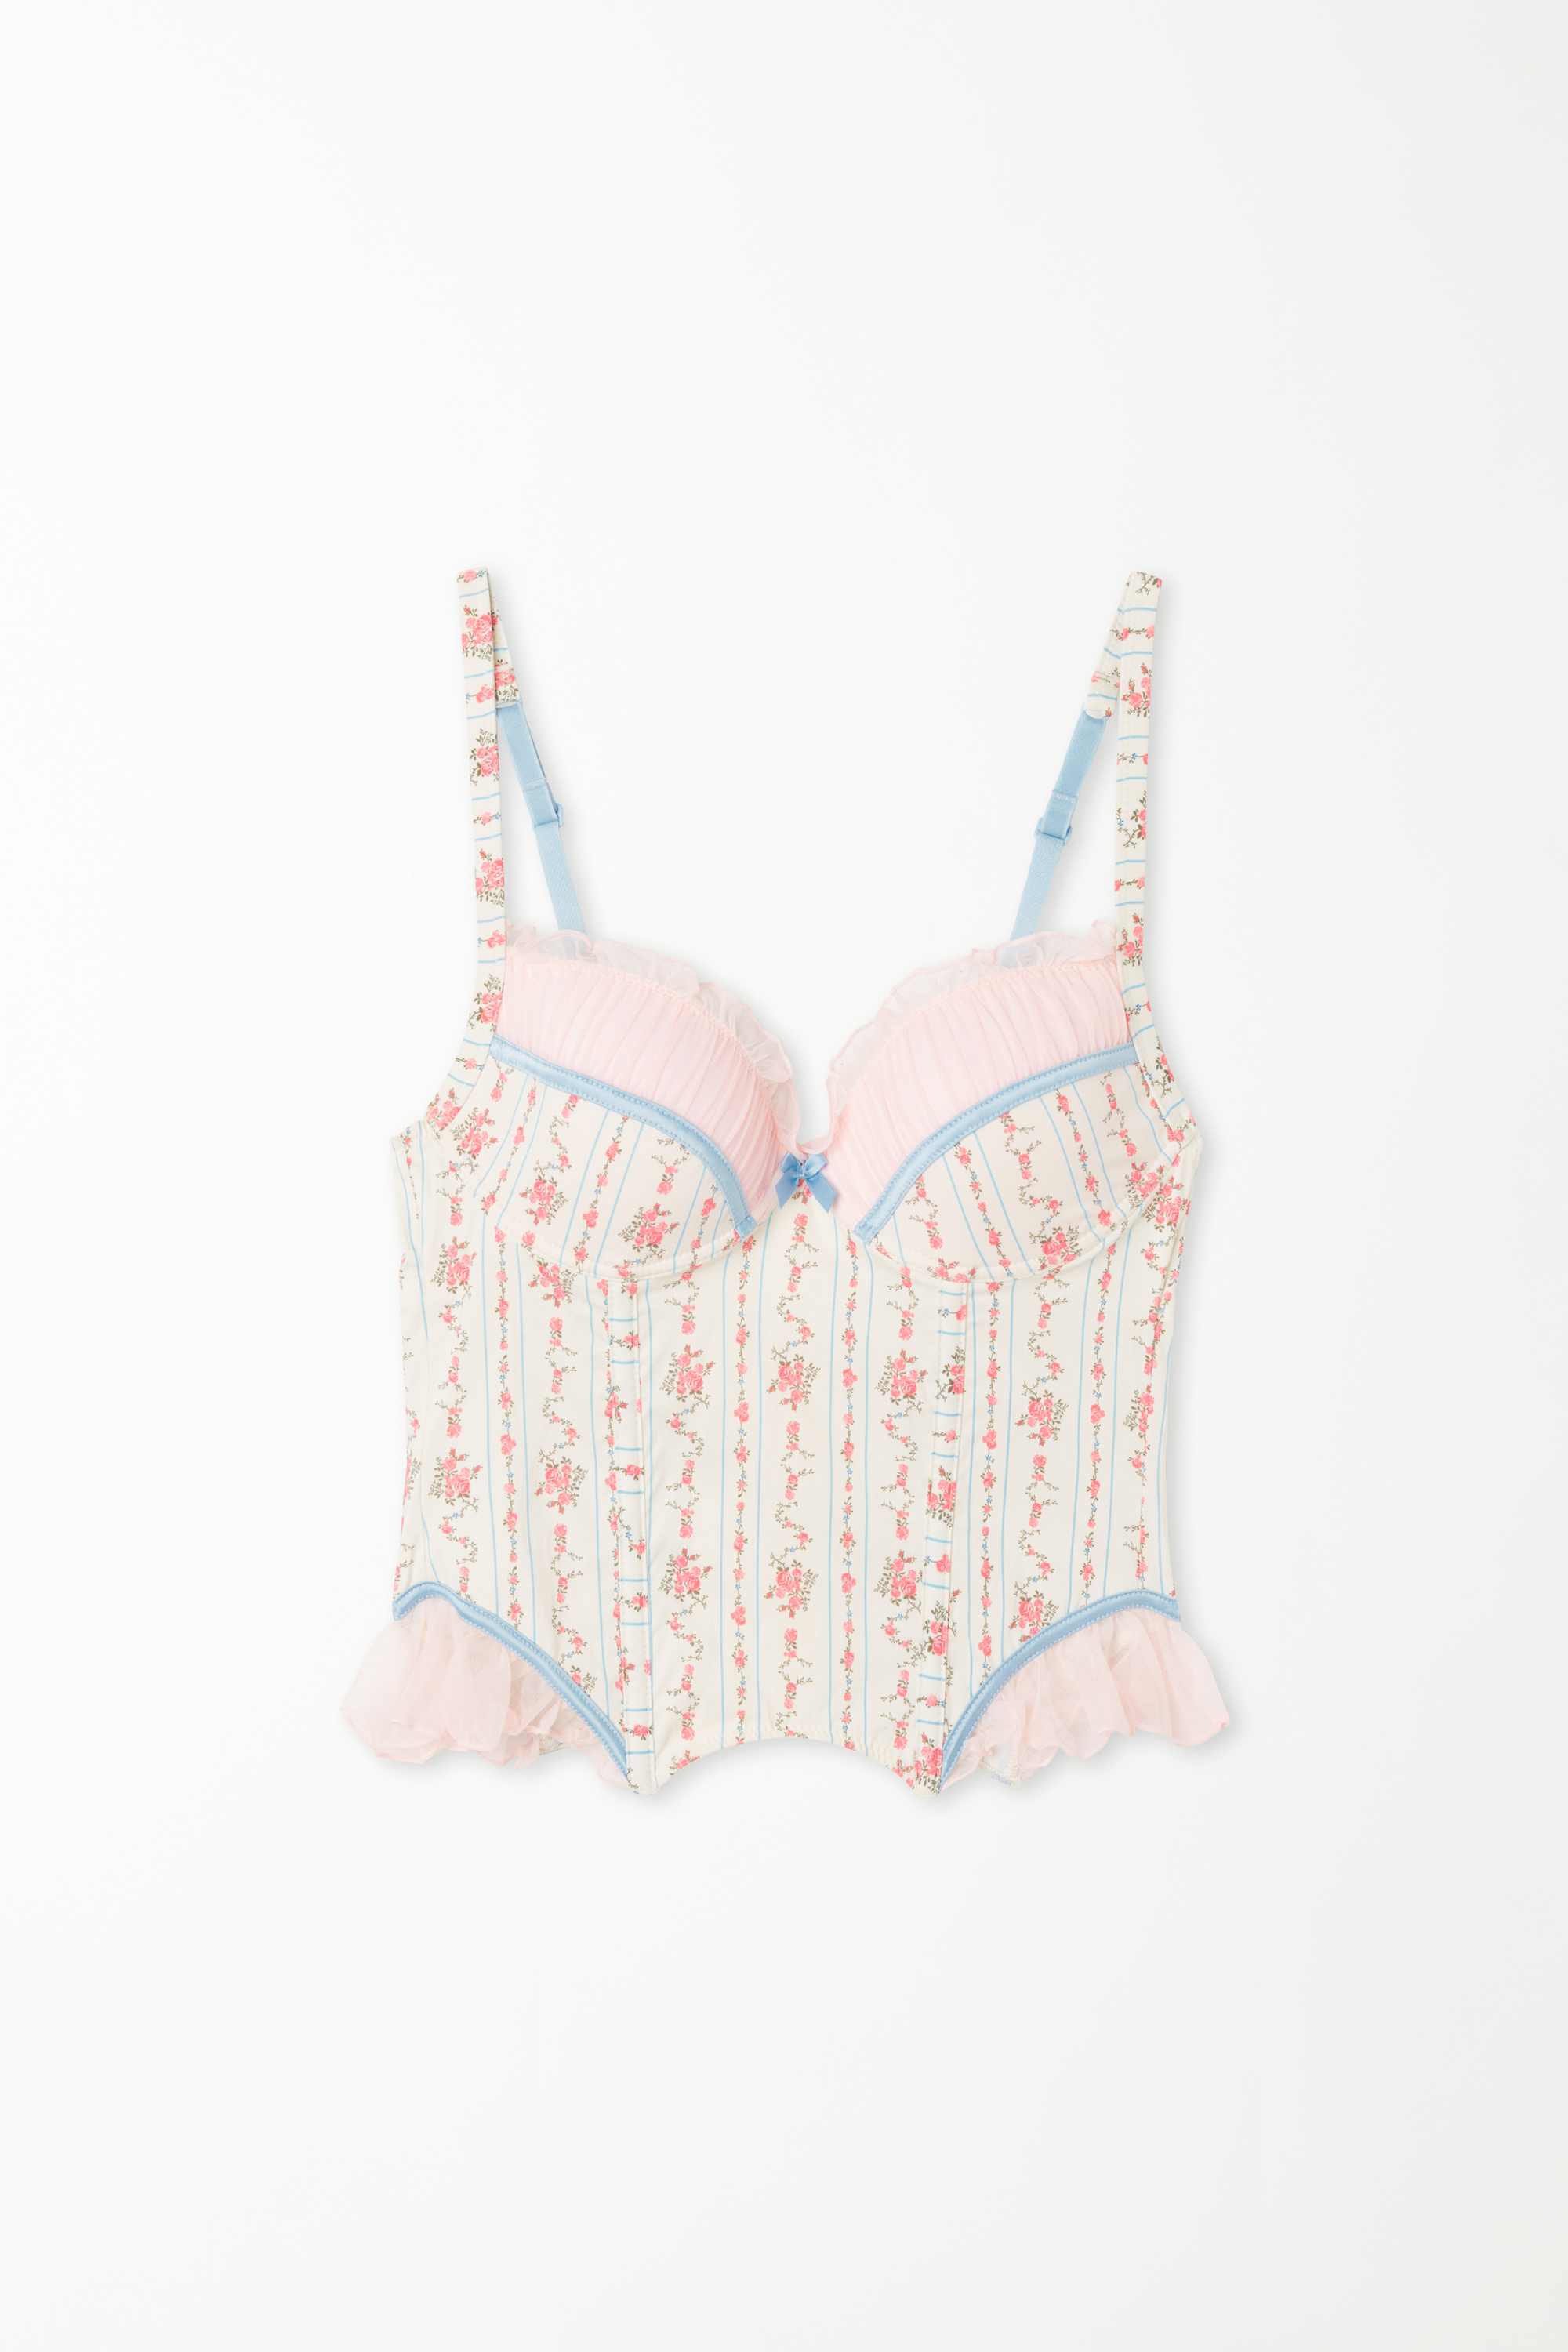 Dreaming Flowers Padded Push-Up Corset Style Bra Top